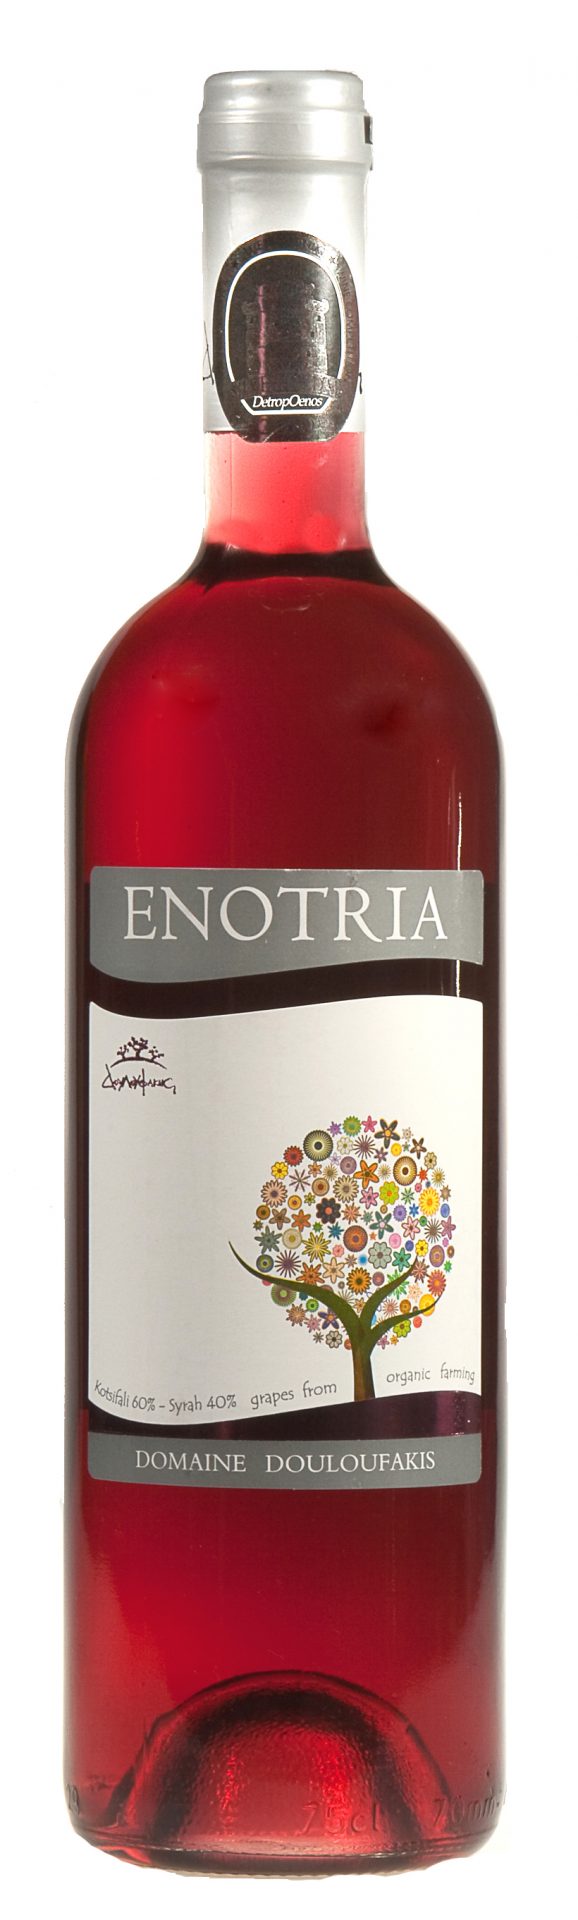 Wine of The Week: “Enotria” Organic Rosé… The Last Rosé of The Summer?